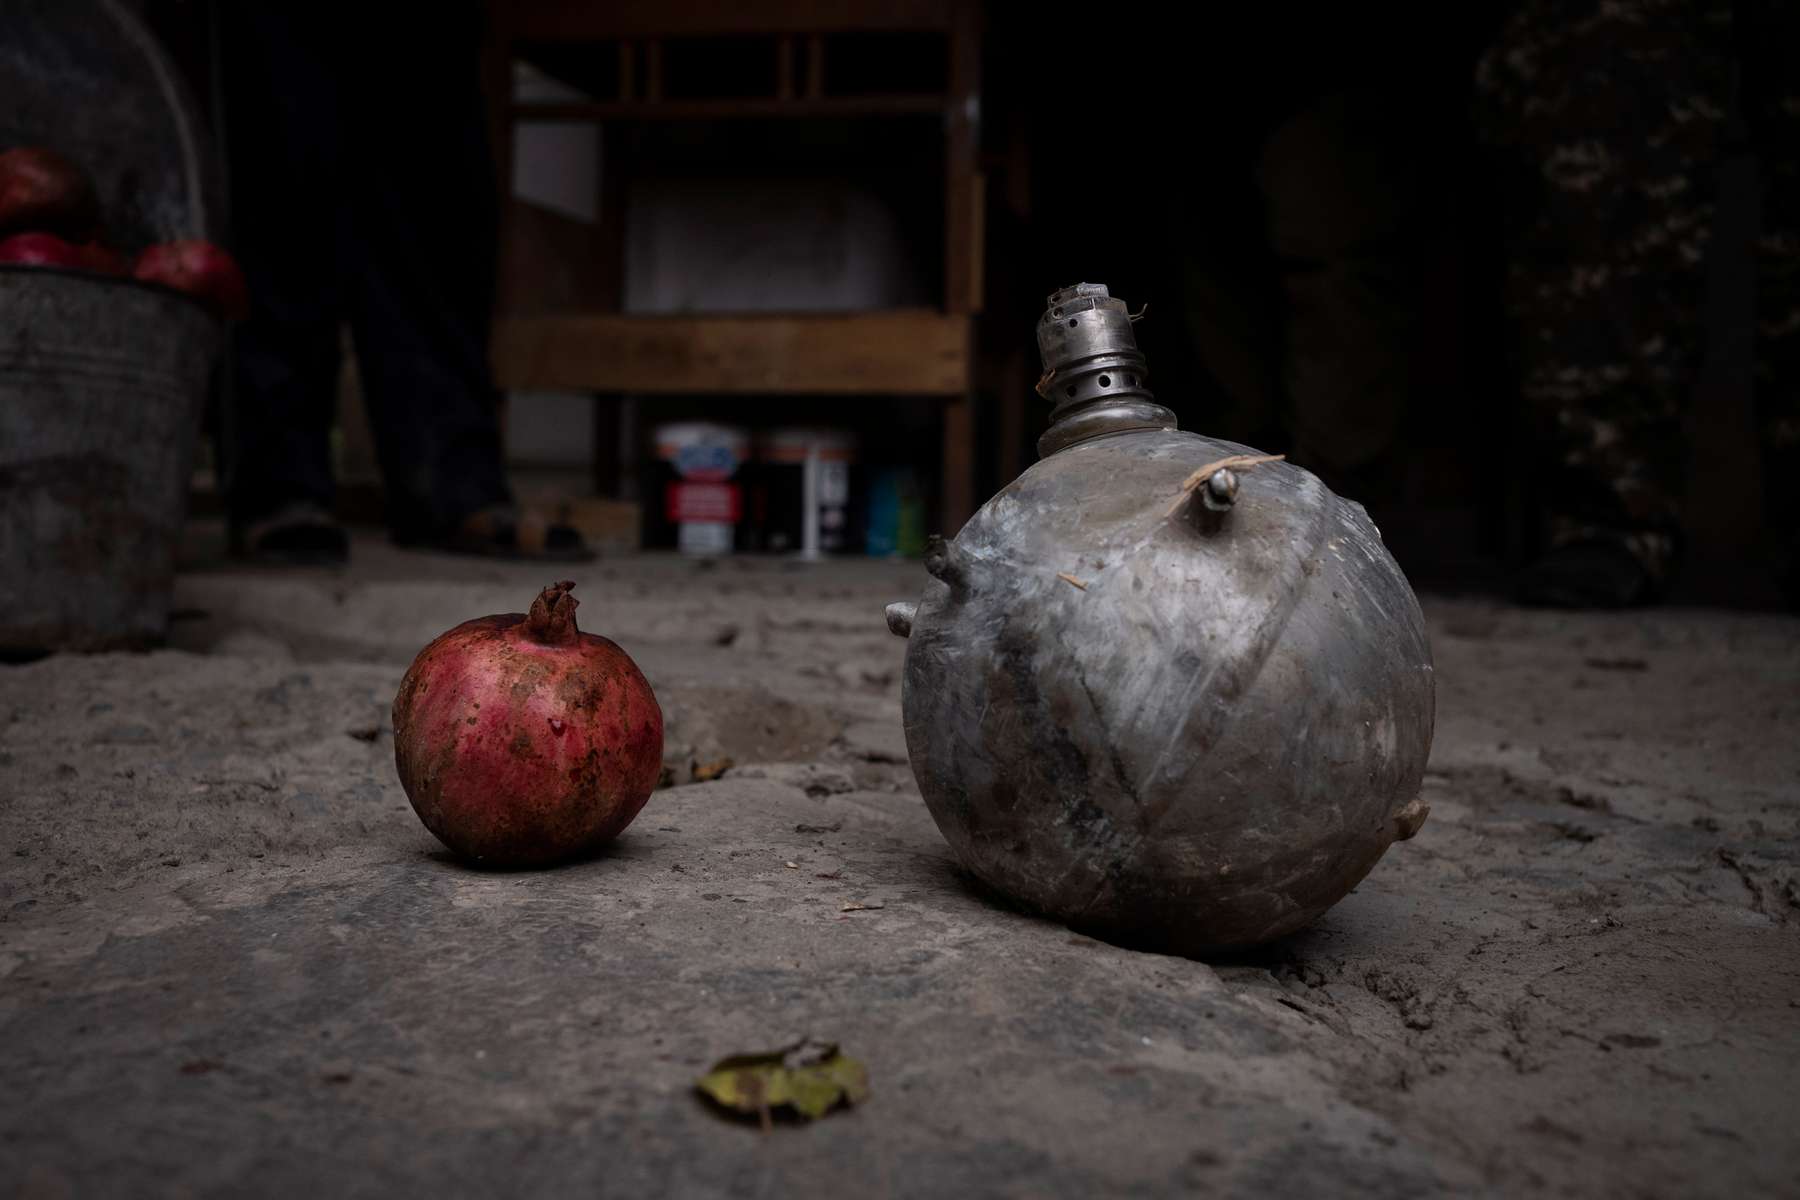 A family in Martakert returned home after the war to find this canister, which explosive ordnance disposal experts from the international landmine and explosives clearance organization the HALO Trust described as a pressure bottle from a guided missile or drone in their garden. A HALO staffer, noting its resemblance to one of the many pomegranates grown at this Martakert family's home, places them side by side to judge. 